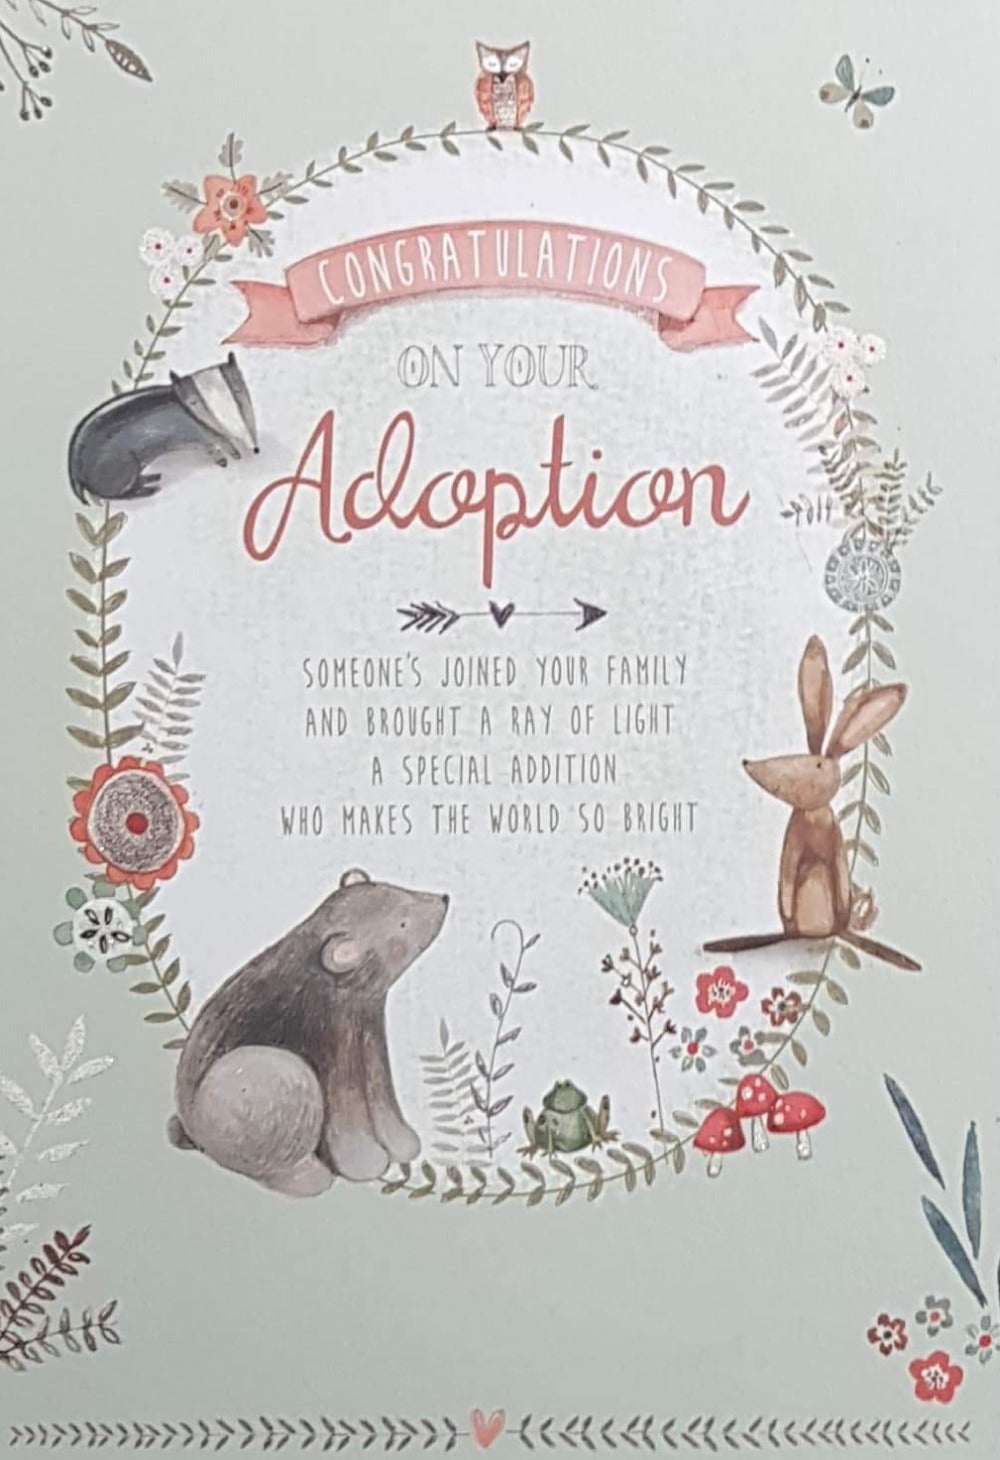 New Baby Card - Adoption / Brought The Ray Of Light